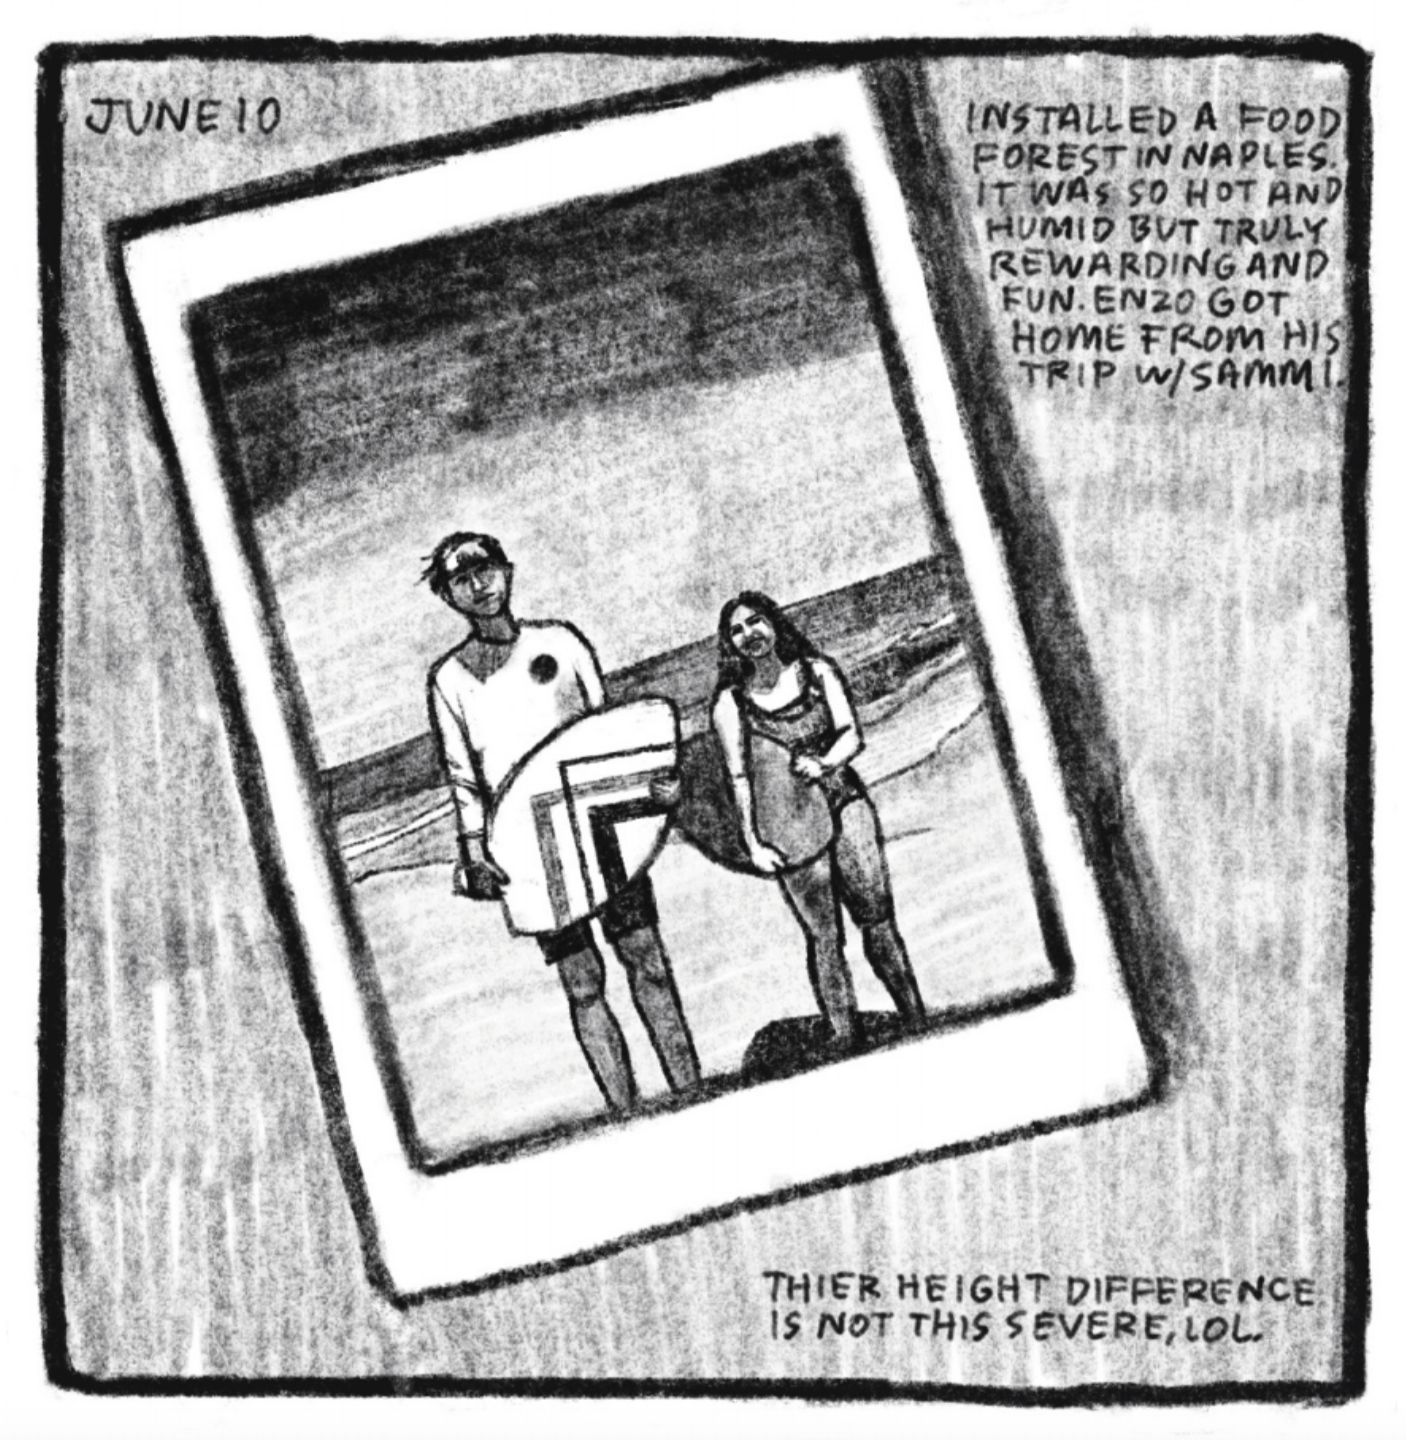 3. A close-up view of a polaroid picture showing Enzo at the beach to the left of a girl who seems to be around his age. Enzo does not smile; he is wearing a long-sleeve white shirt and swimming trunks; he holds a white bodyboard with a geometric design in his arms. The girl next to him is about two heads shorter; she is smiling and wearing a dark one piece swimsuit and holding a monochrome bodyboard in her arms. The ocean is seen behind them, probably just a few feet away. â€œJune 10. Installed a food forest in Naples. It was so hot and humid but truly rewarding and fun. Enzo got home from his trip with Sammi. Their height difference is not this severe, LOL.â€